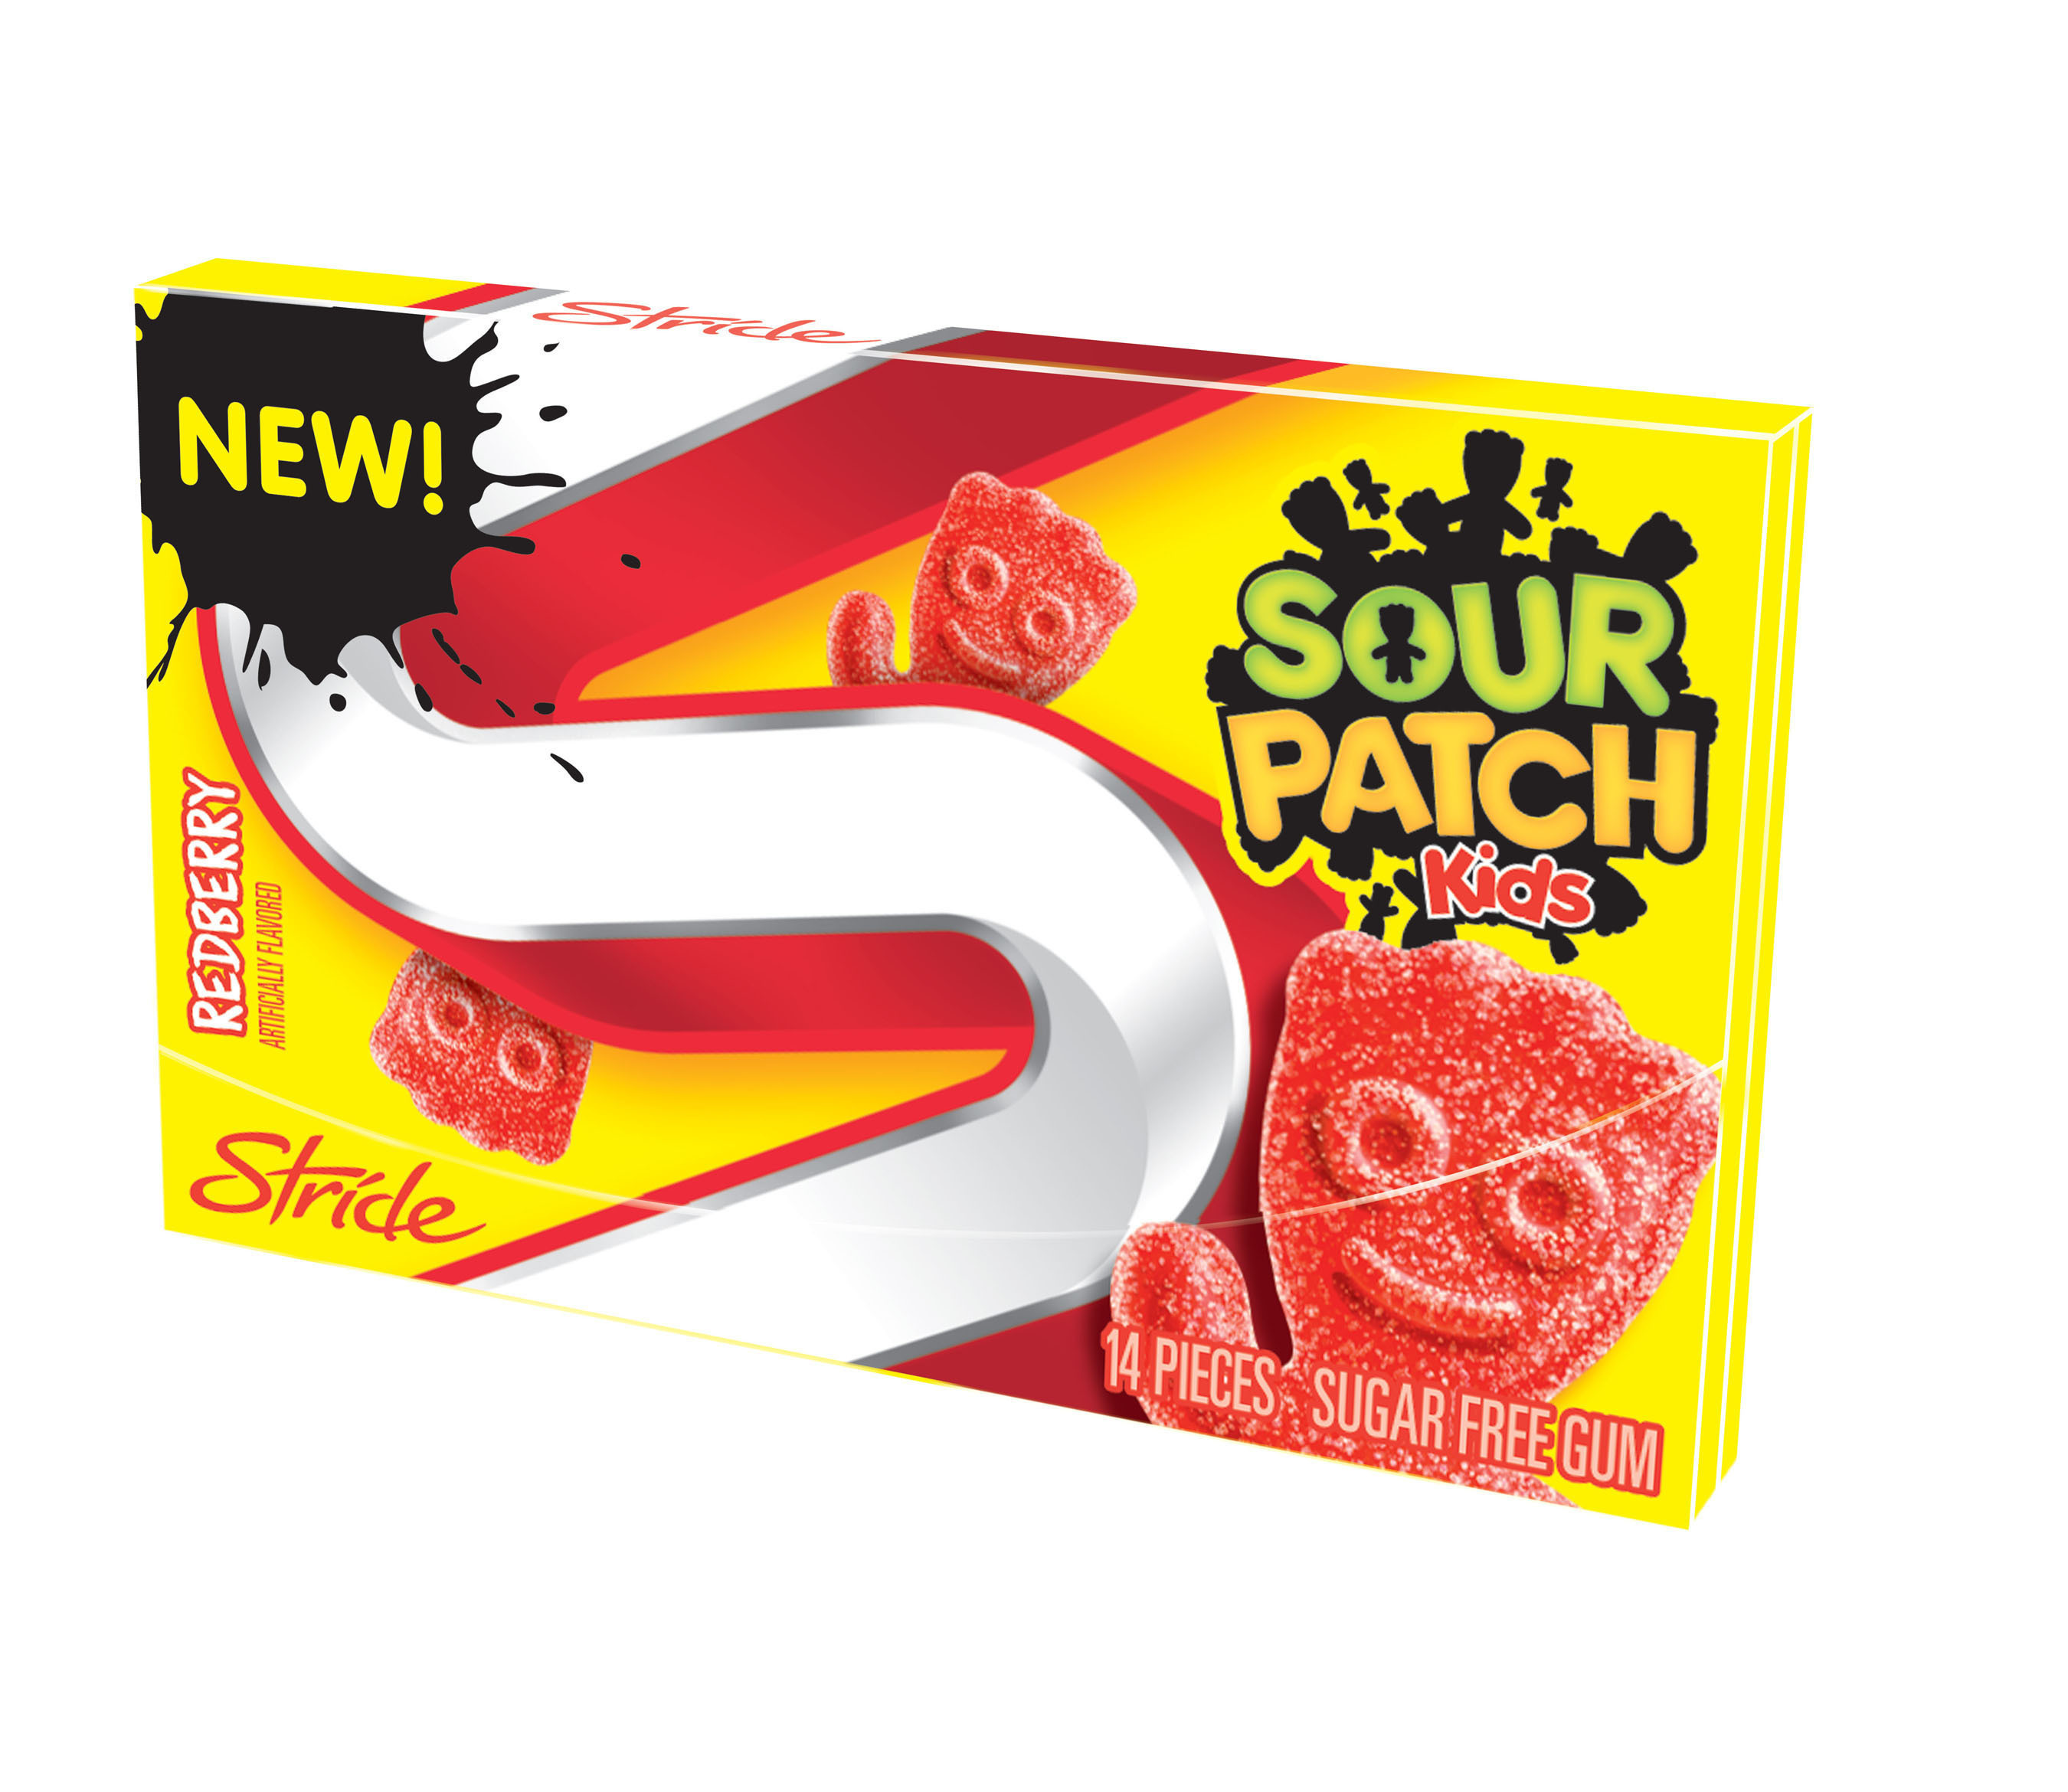 Stride and Sour Patch Kids bring the iconic "Sour, then Sweet" experience to gum. (PRNewsFoto/Mondelez International, Inc.) (PRNewsFoto/MONDELEZ INTERNATIONAL, INC.)